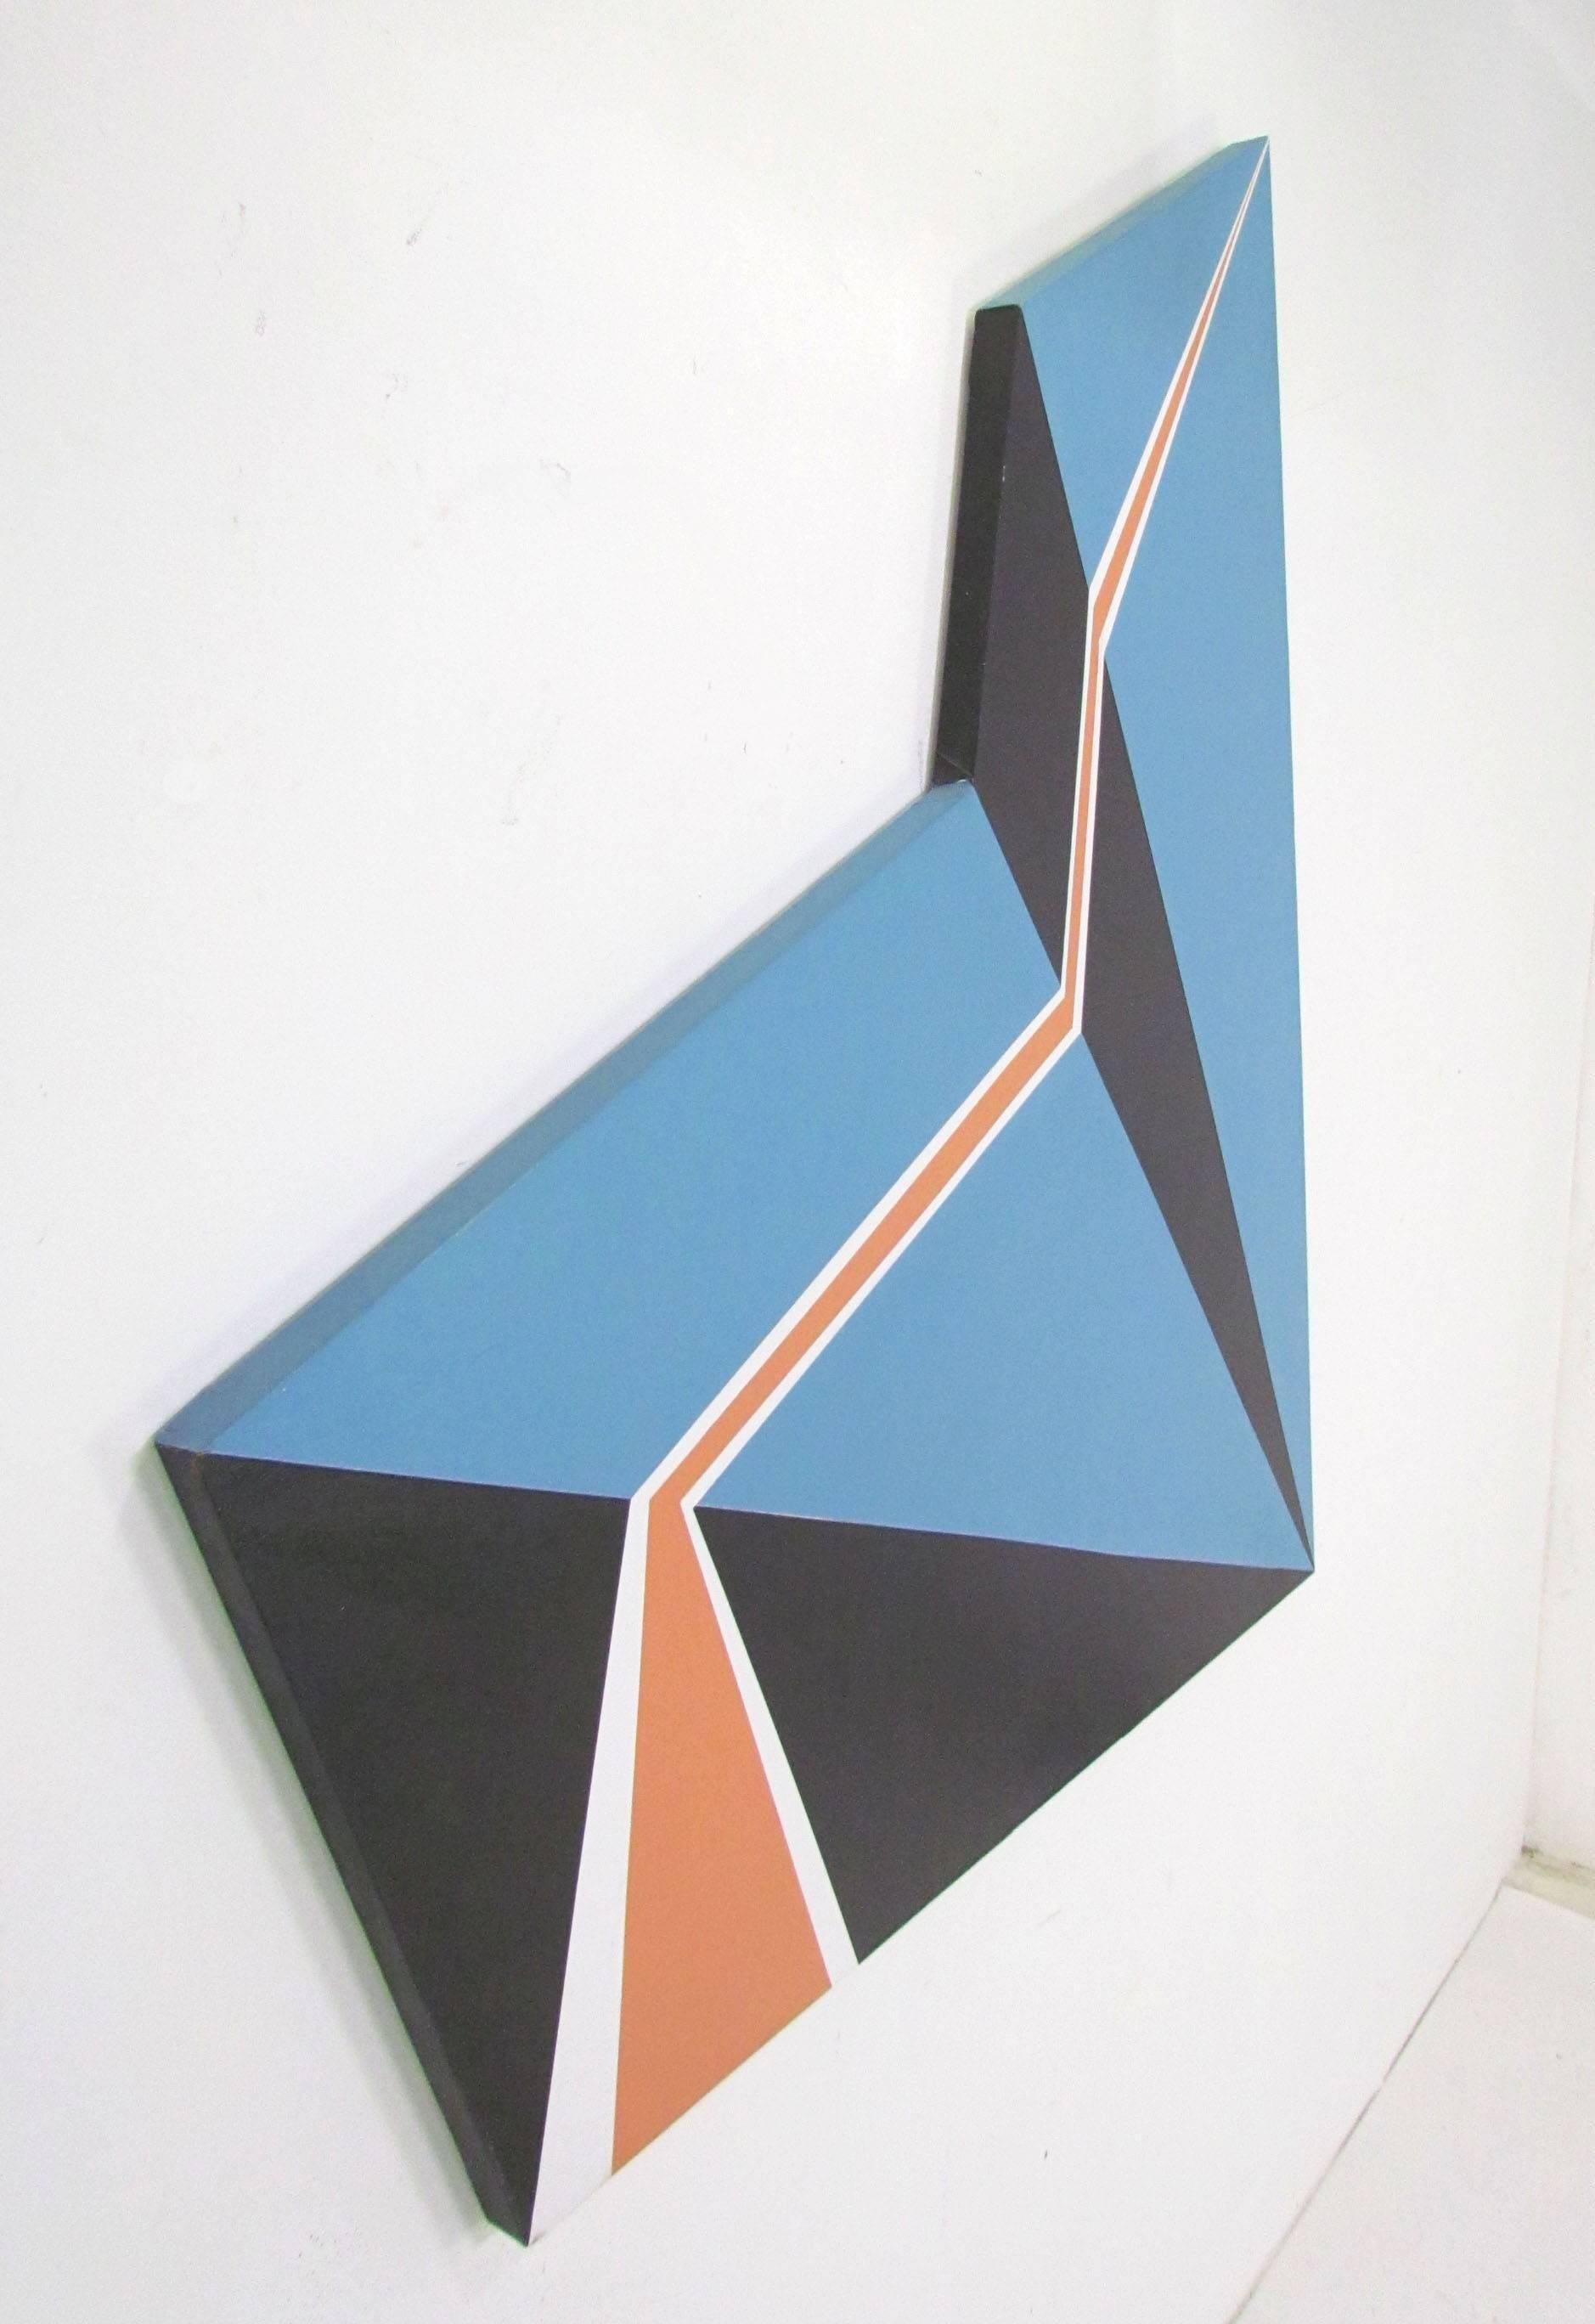 Hard-edge painting by Florida based artist Mimi Chan, circa 1980s. Striking geometric abstract on a built canvas in the manner of Frank Stella.